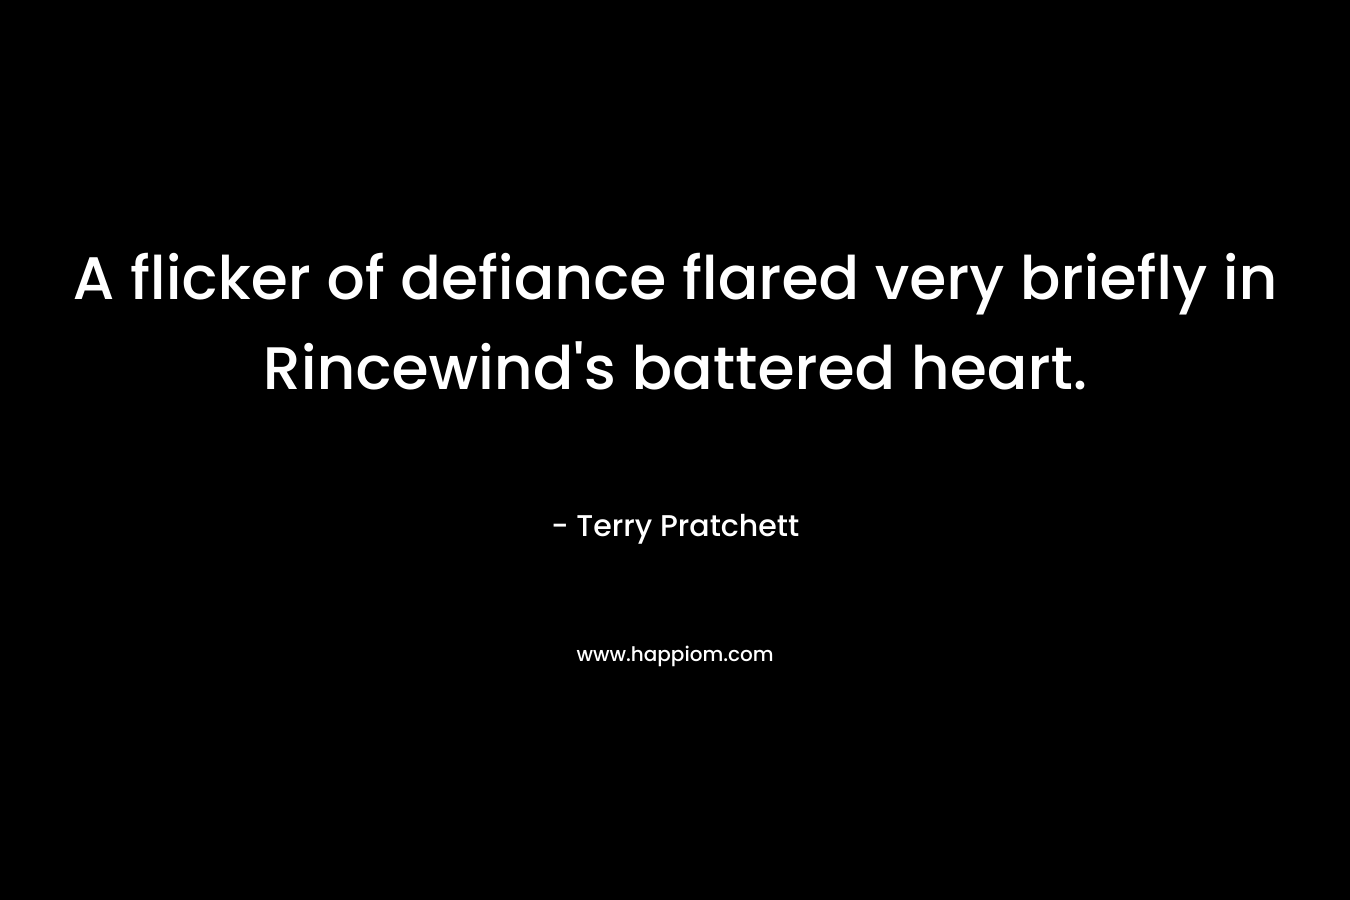 A flicker of defiance flared very briefly in Rincewind's battered heart.